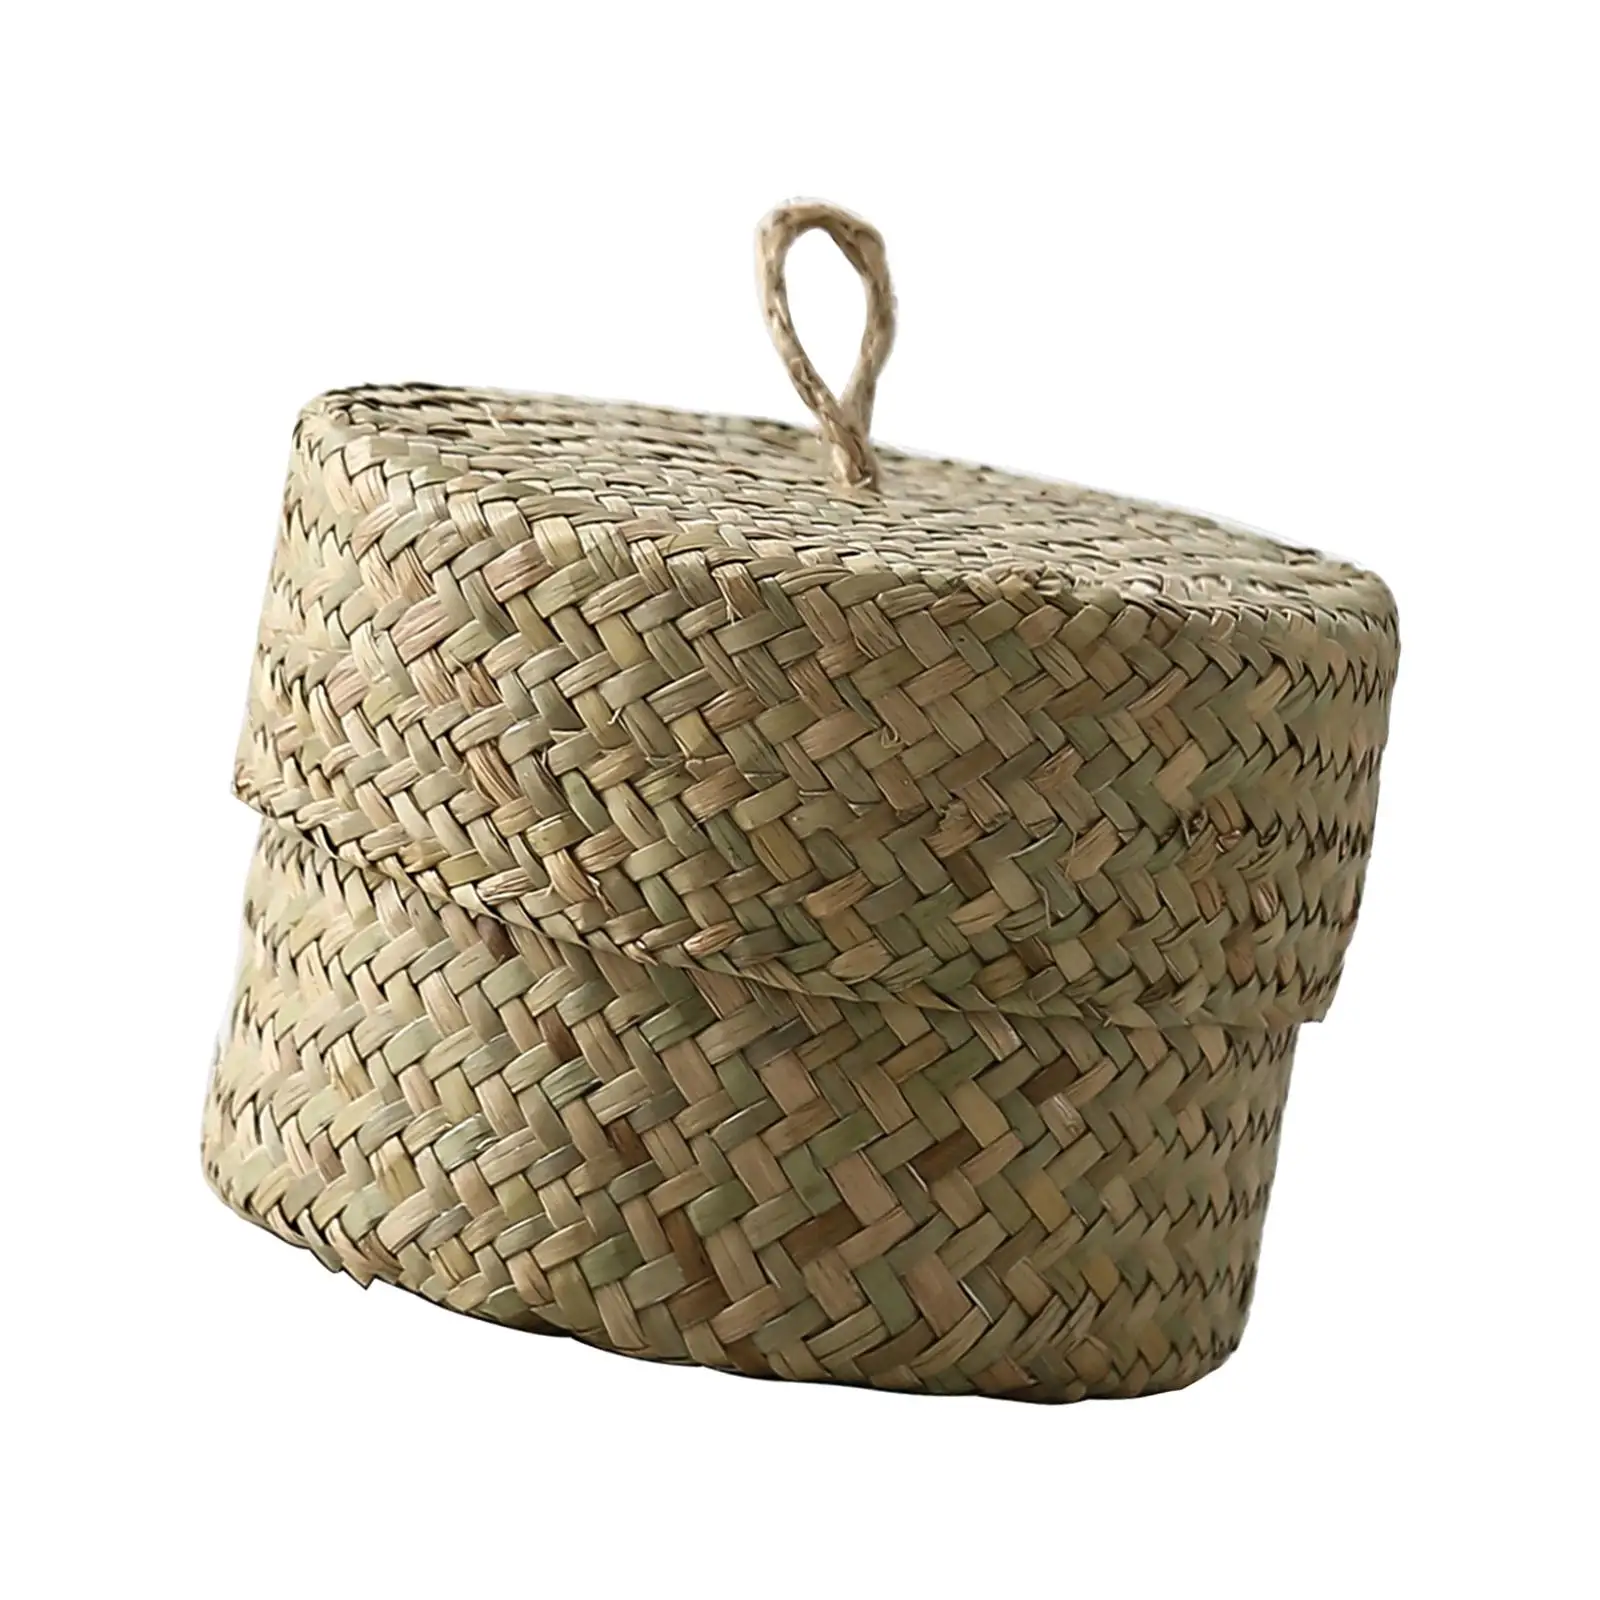 Candy Box with Lid Seagrass Organizer Household Handmade Finishing Box Container Handwoven Rattan Storage Basket for Living Room